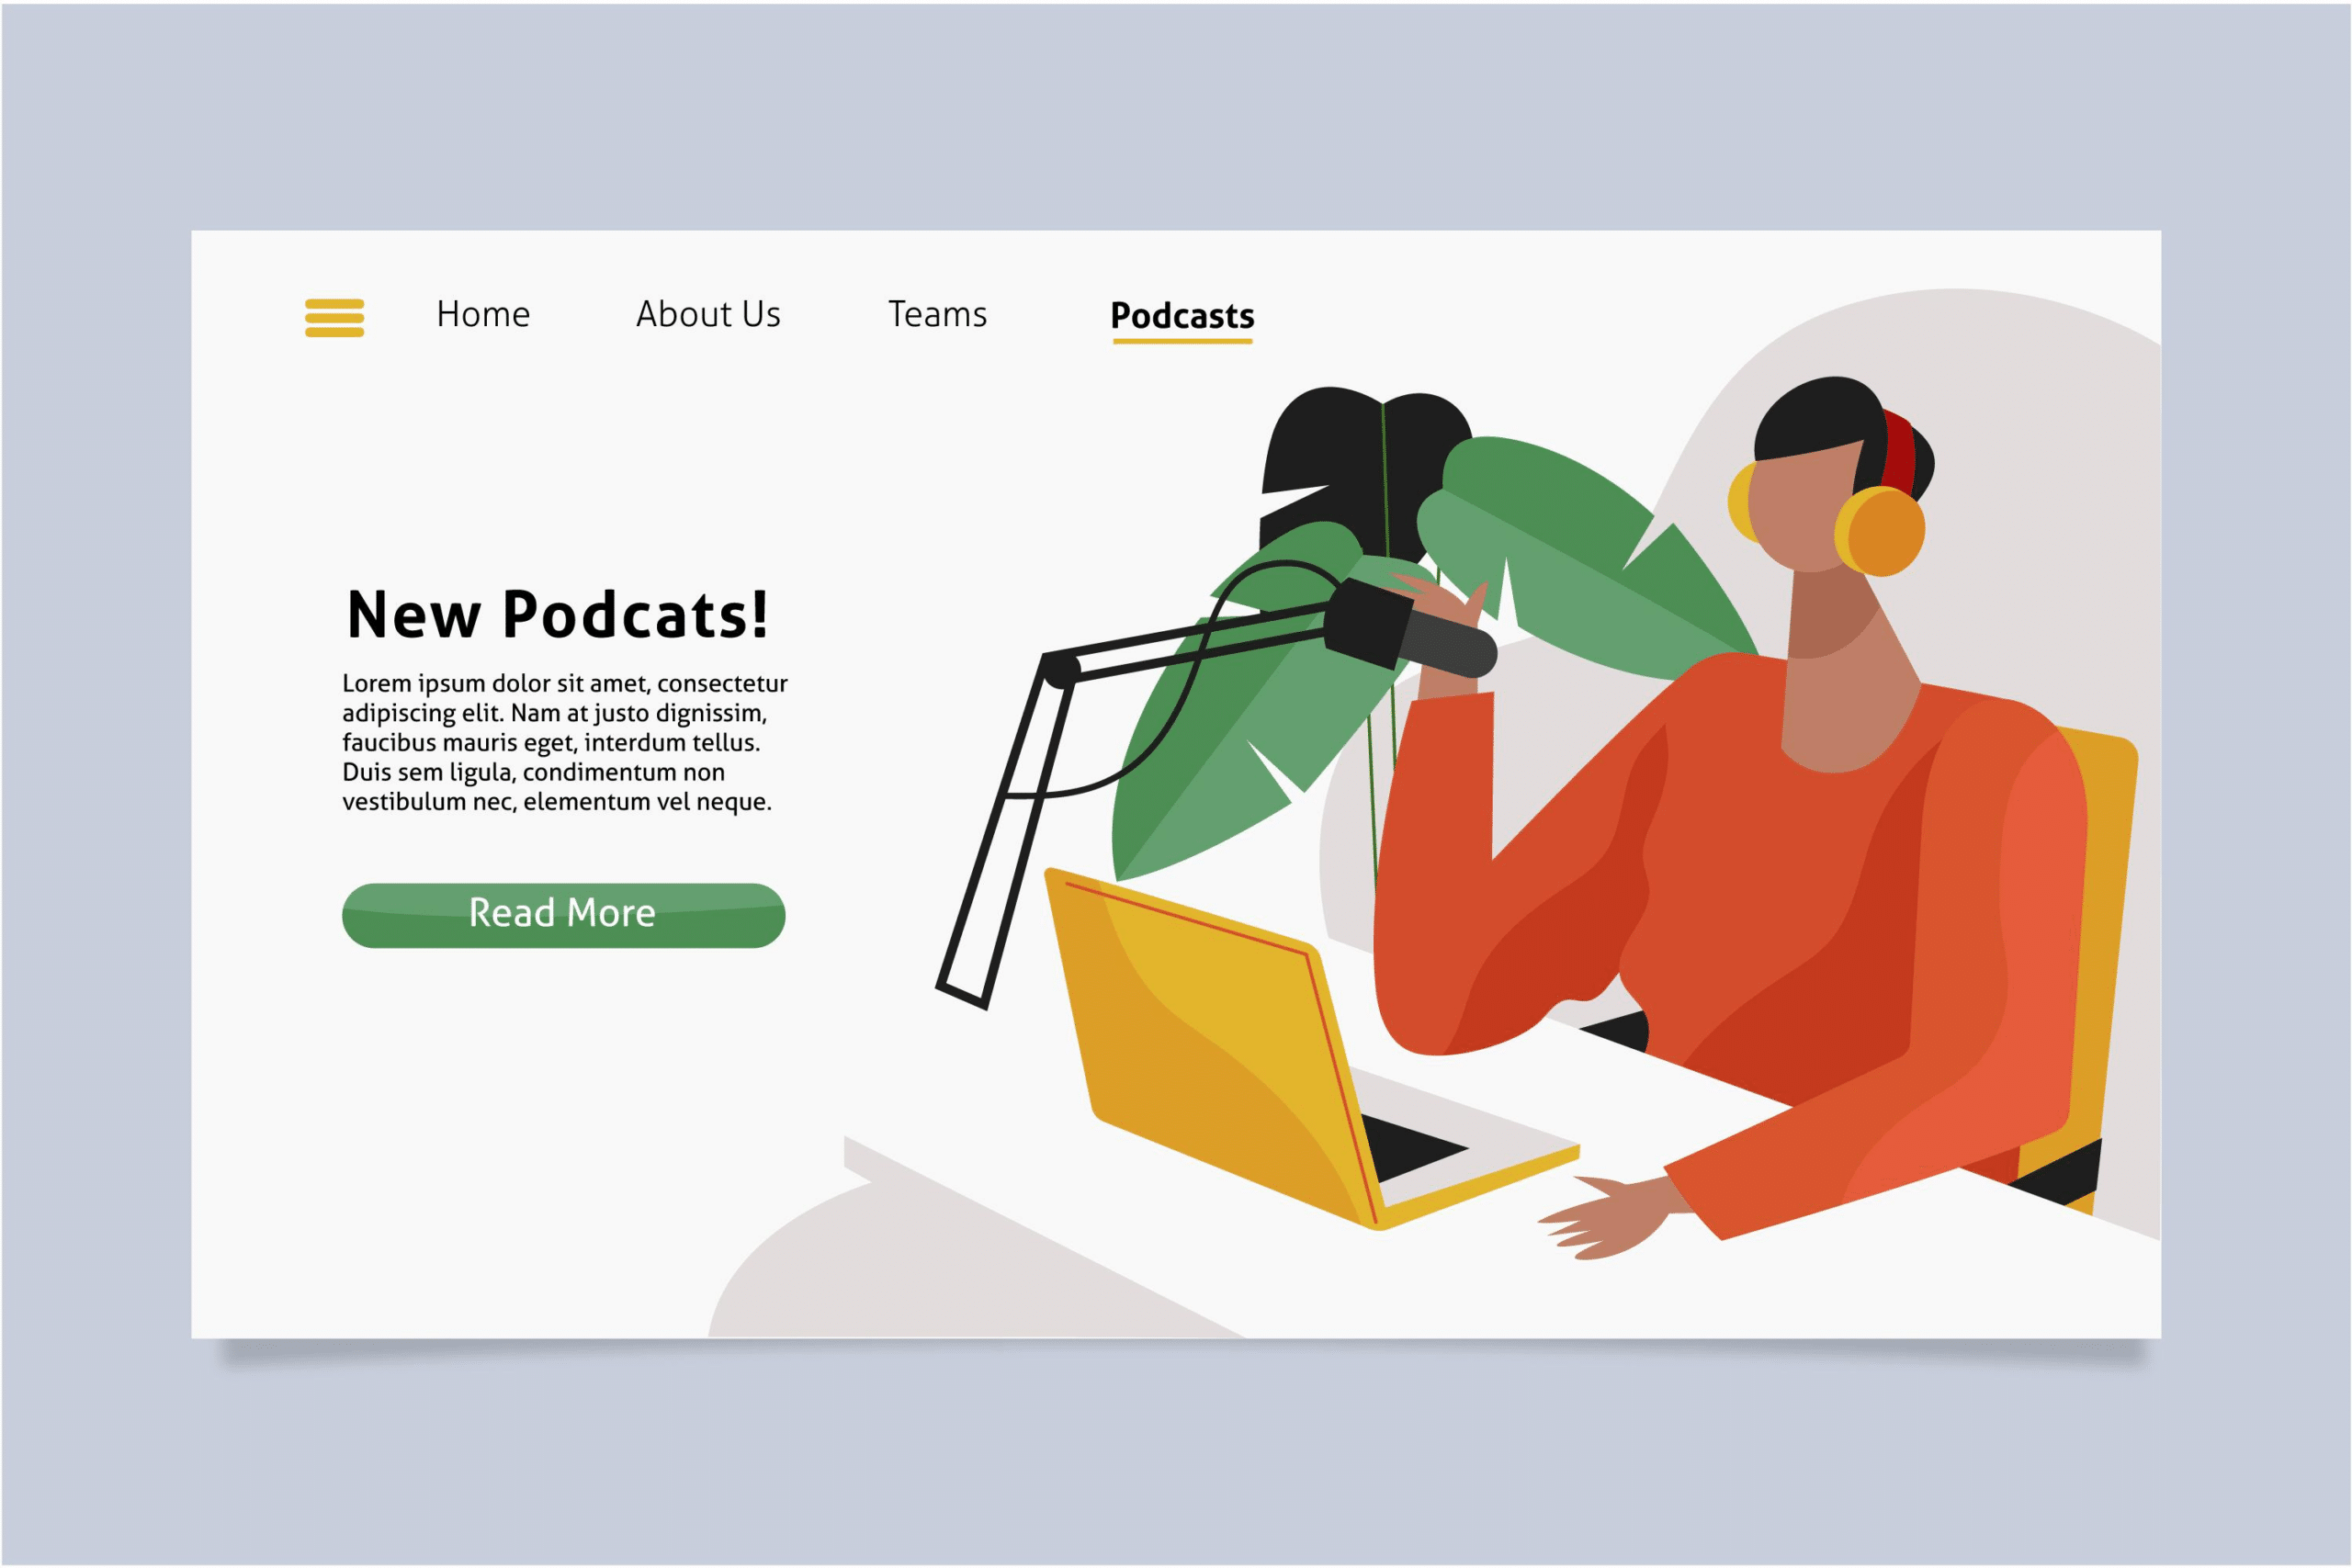 Embedding a podcast player on their website